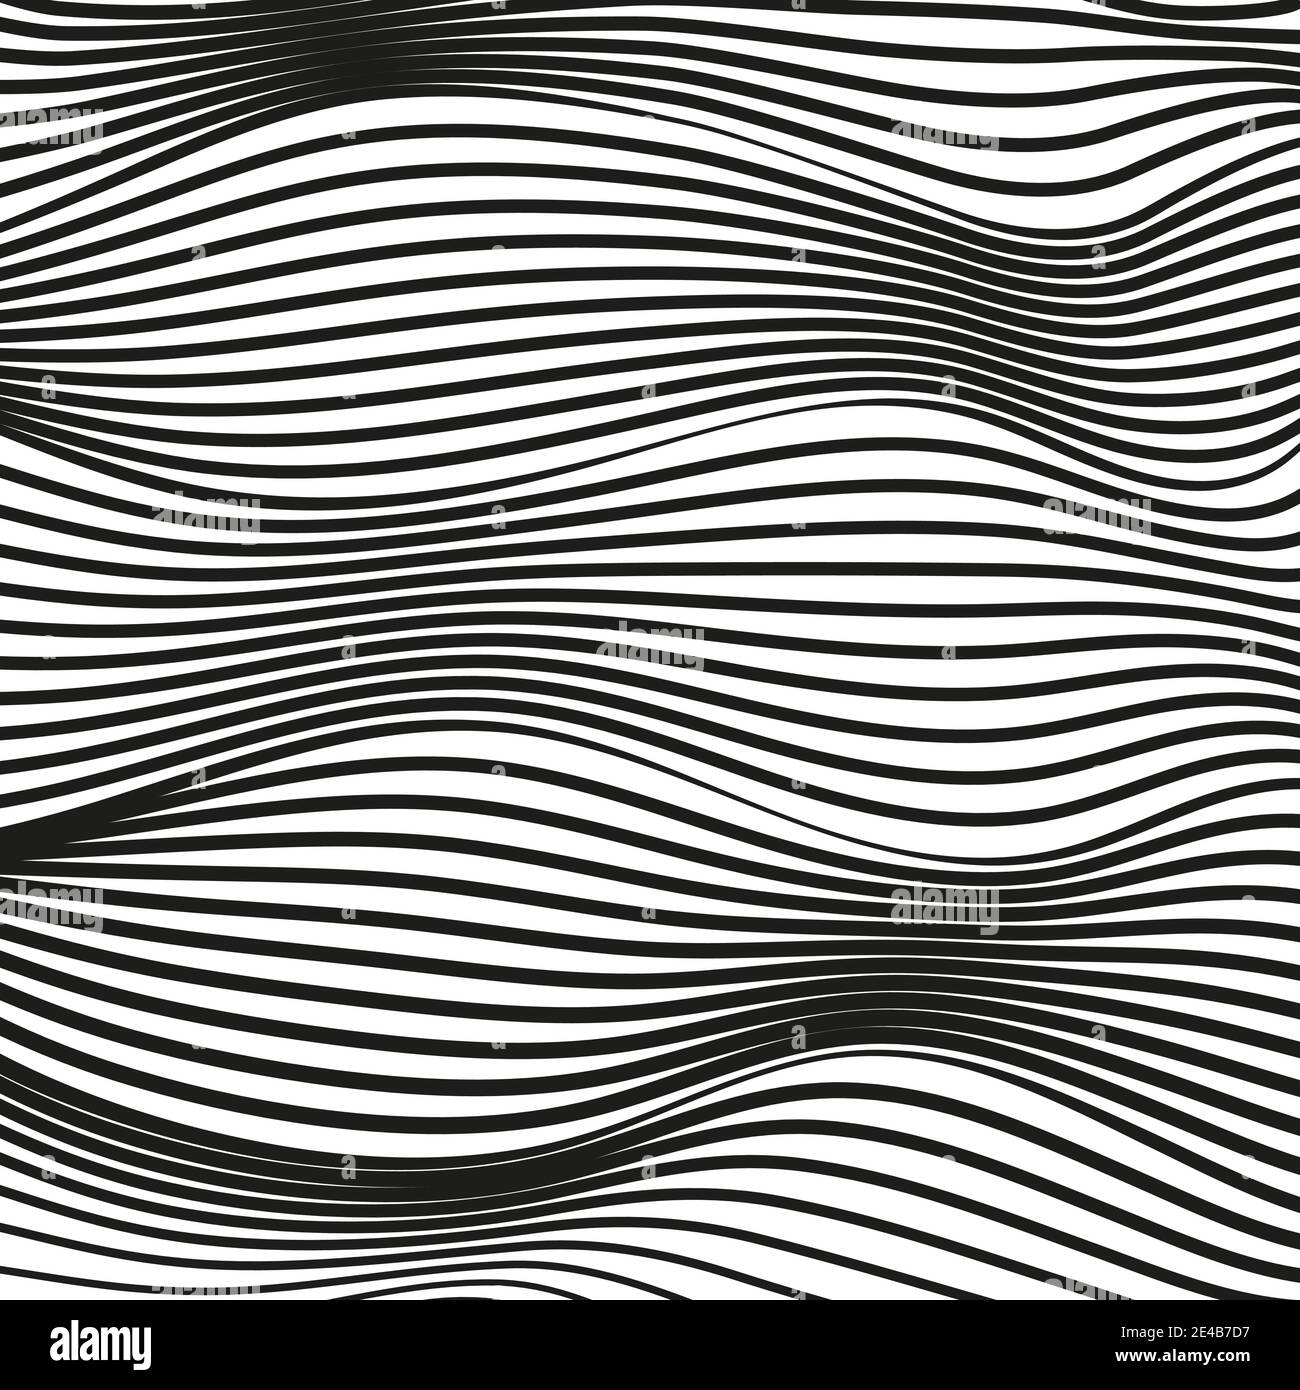 Black and white deformed background. Abstract op art pattern. Modern conceptual illusion. Vector squiggle, warped lines. Scientific waving design. EPS Stock Vector